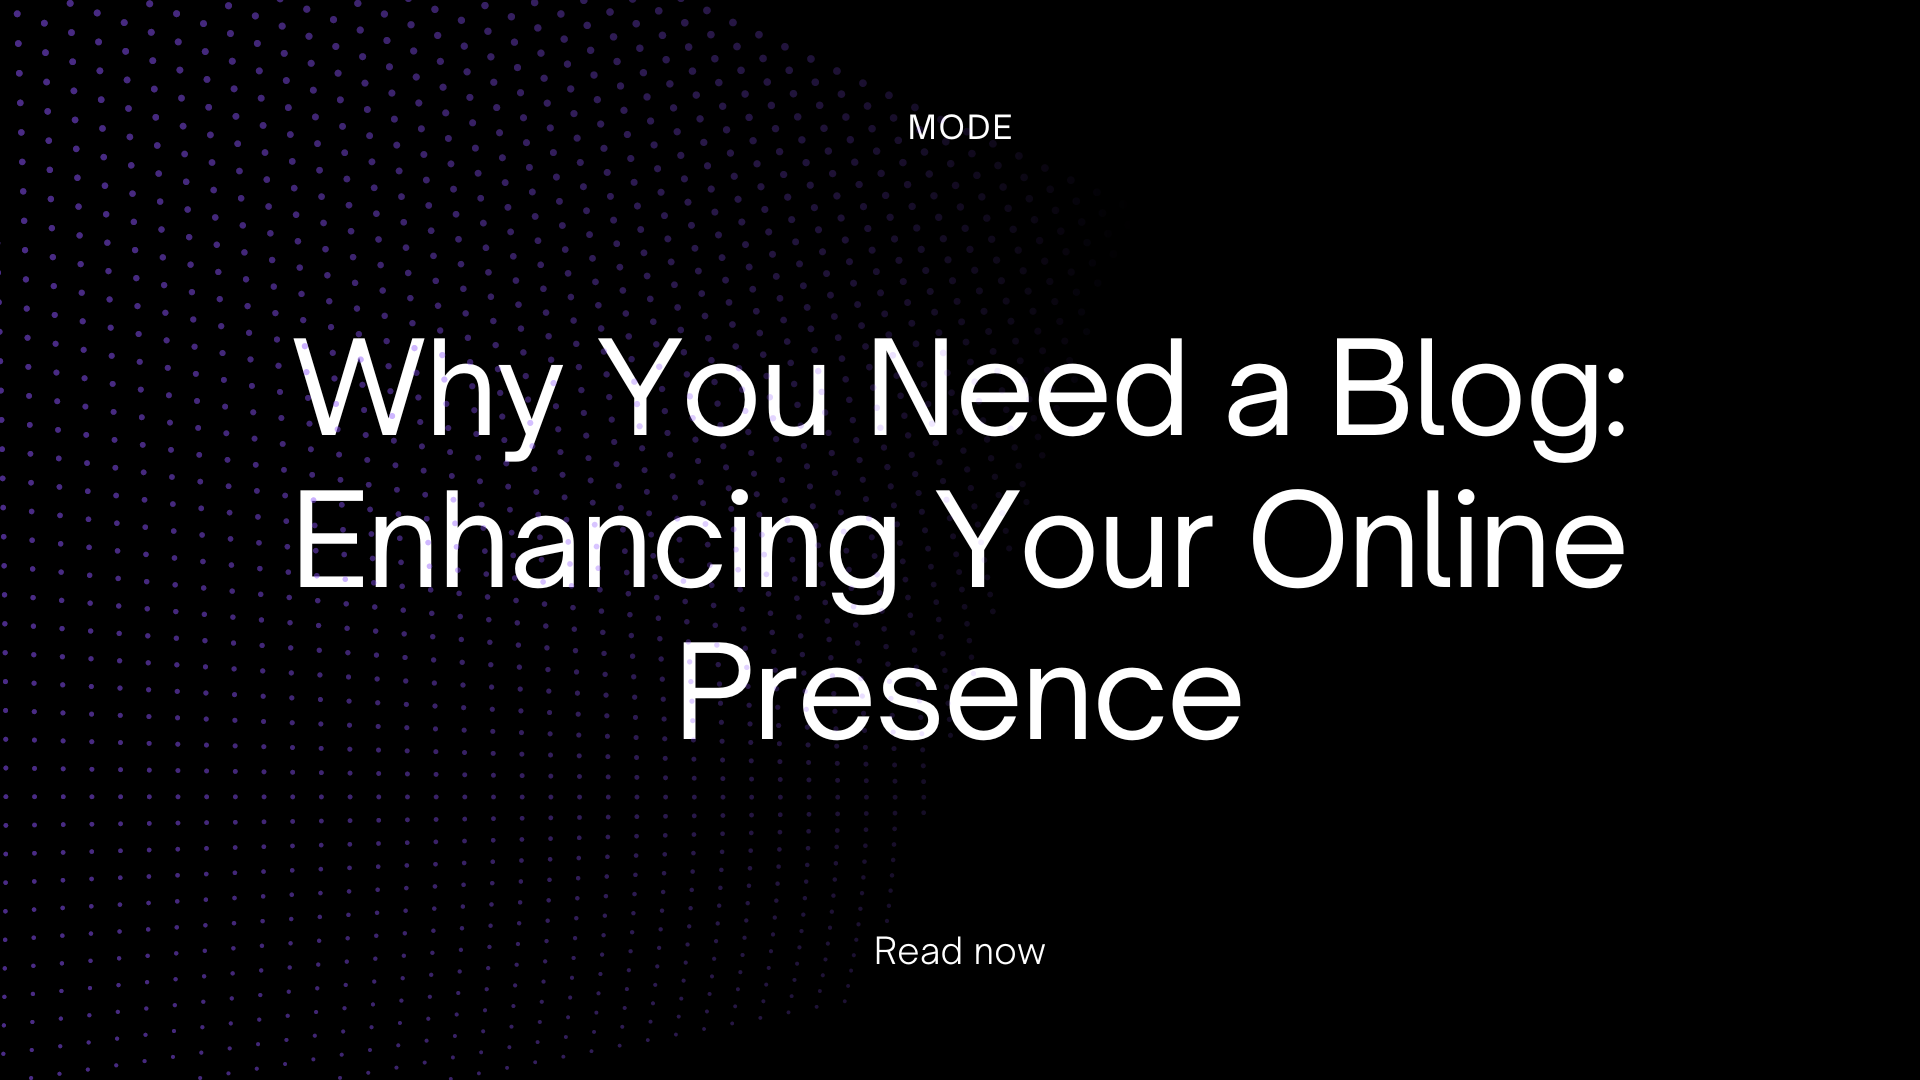 Why You Need a Blog: Enhancing Your Online Presence